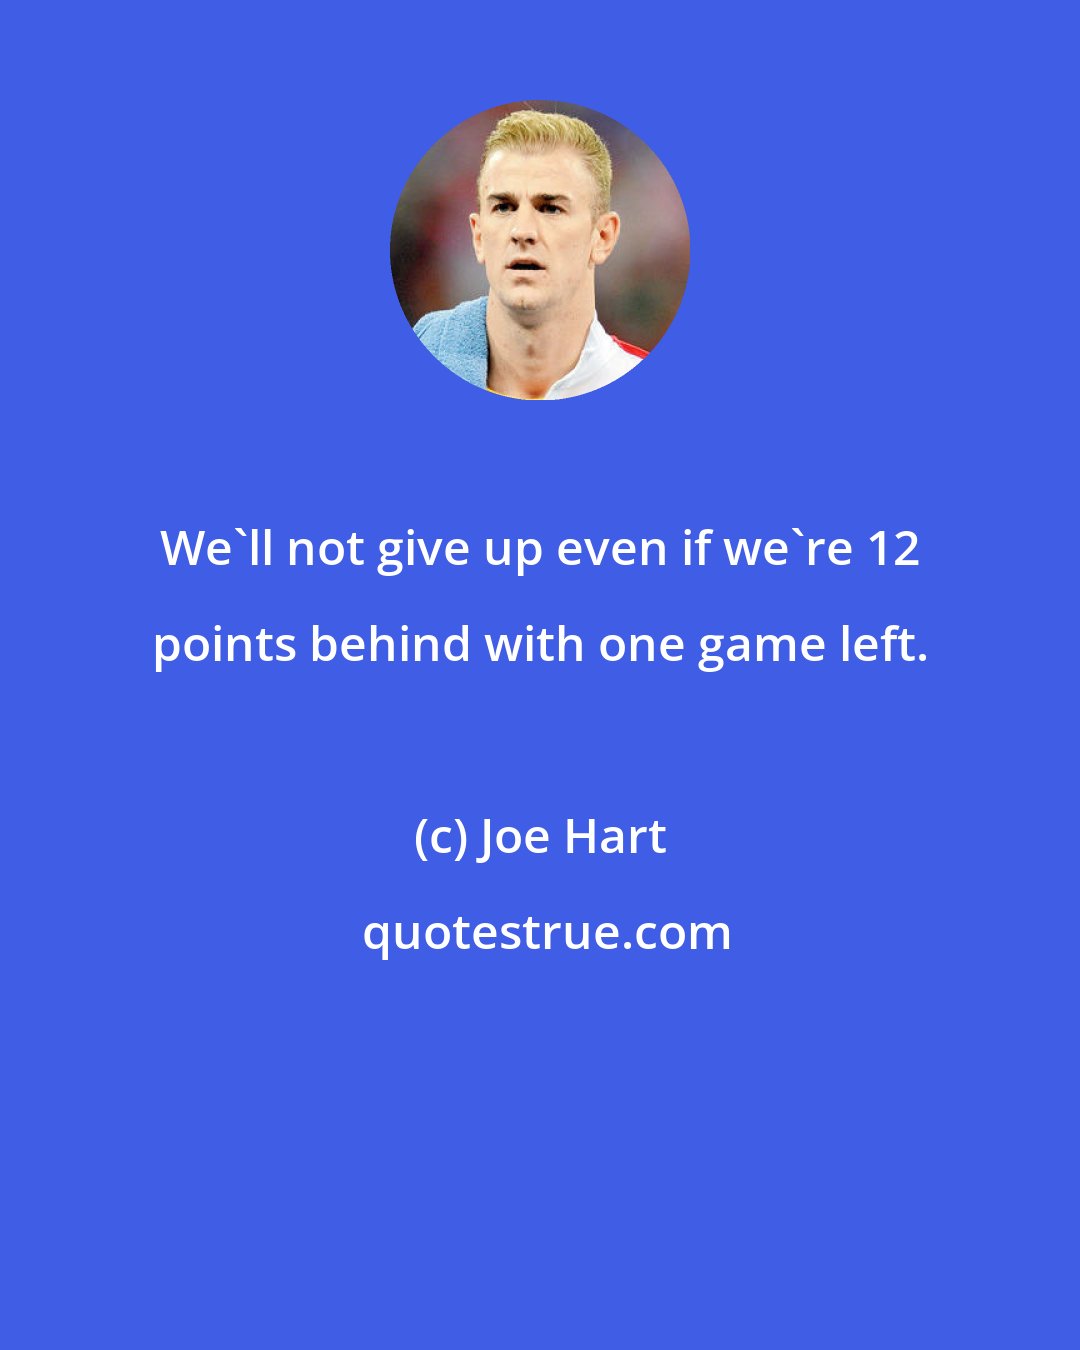 Joe Hart: We'll not give up even if we're 12 points behind with one game left.